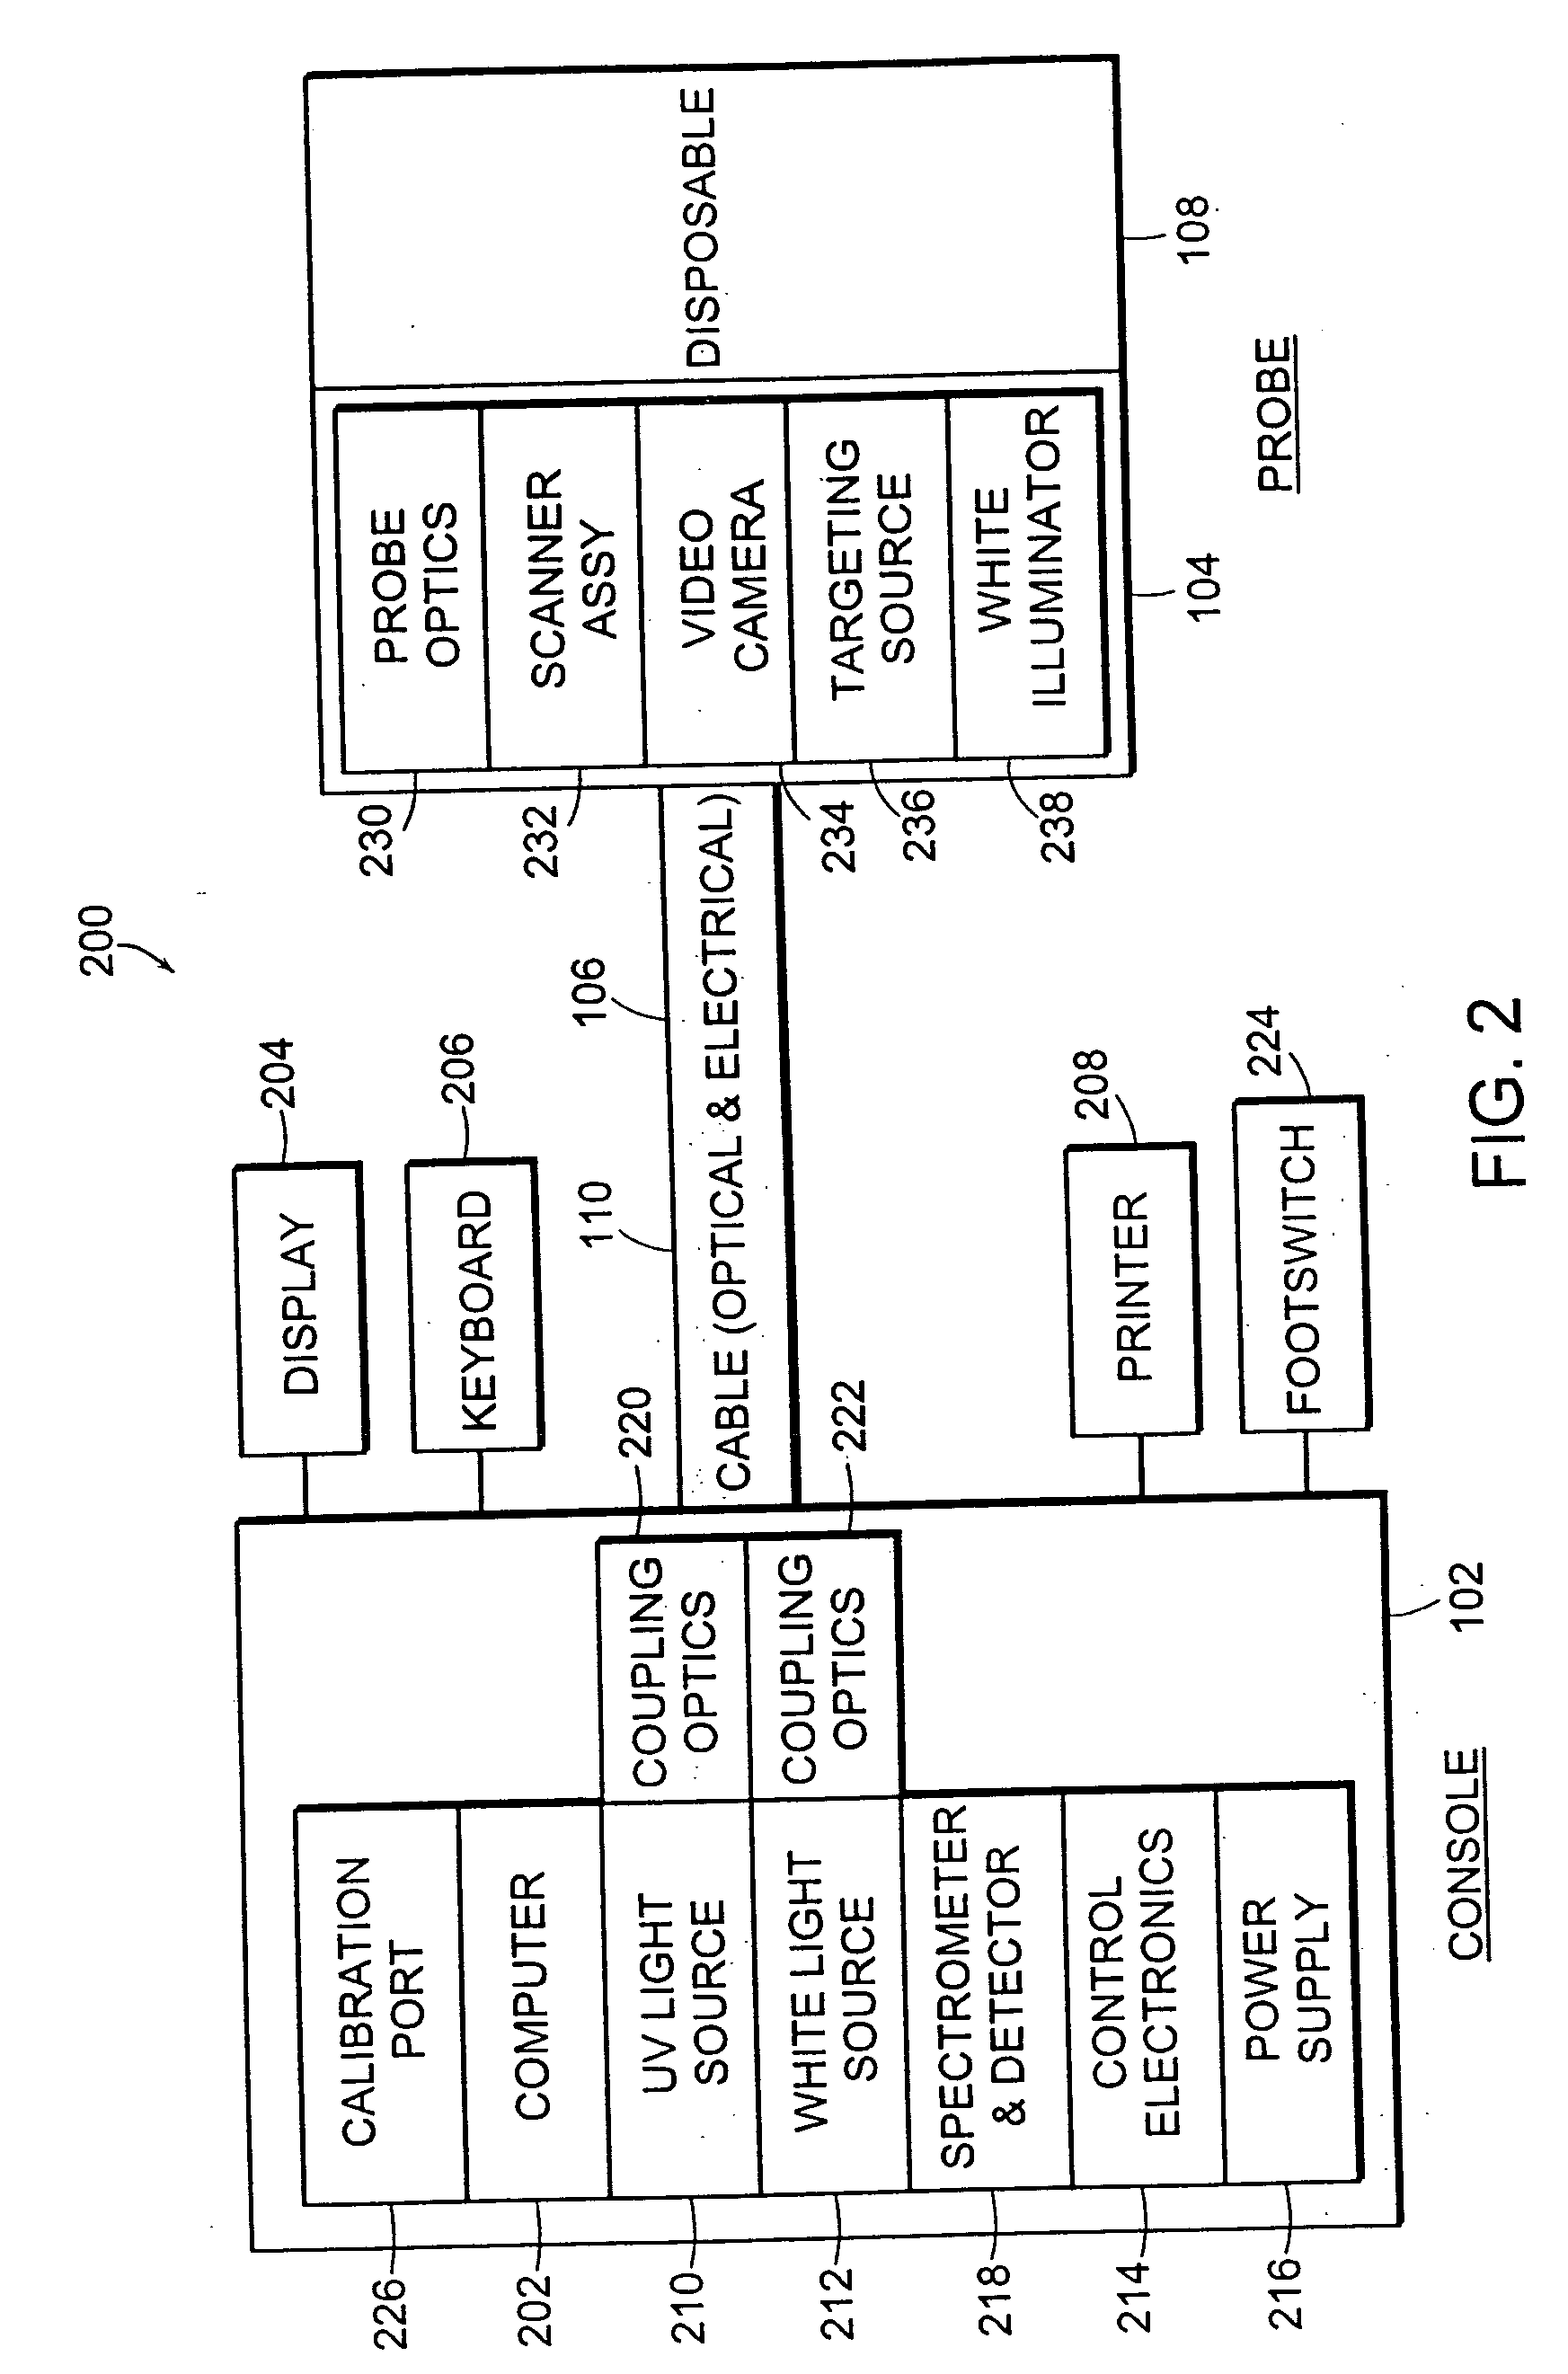 Methods of monitoring effects of chemical agents on a sample